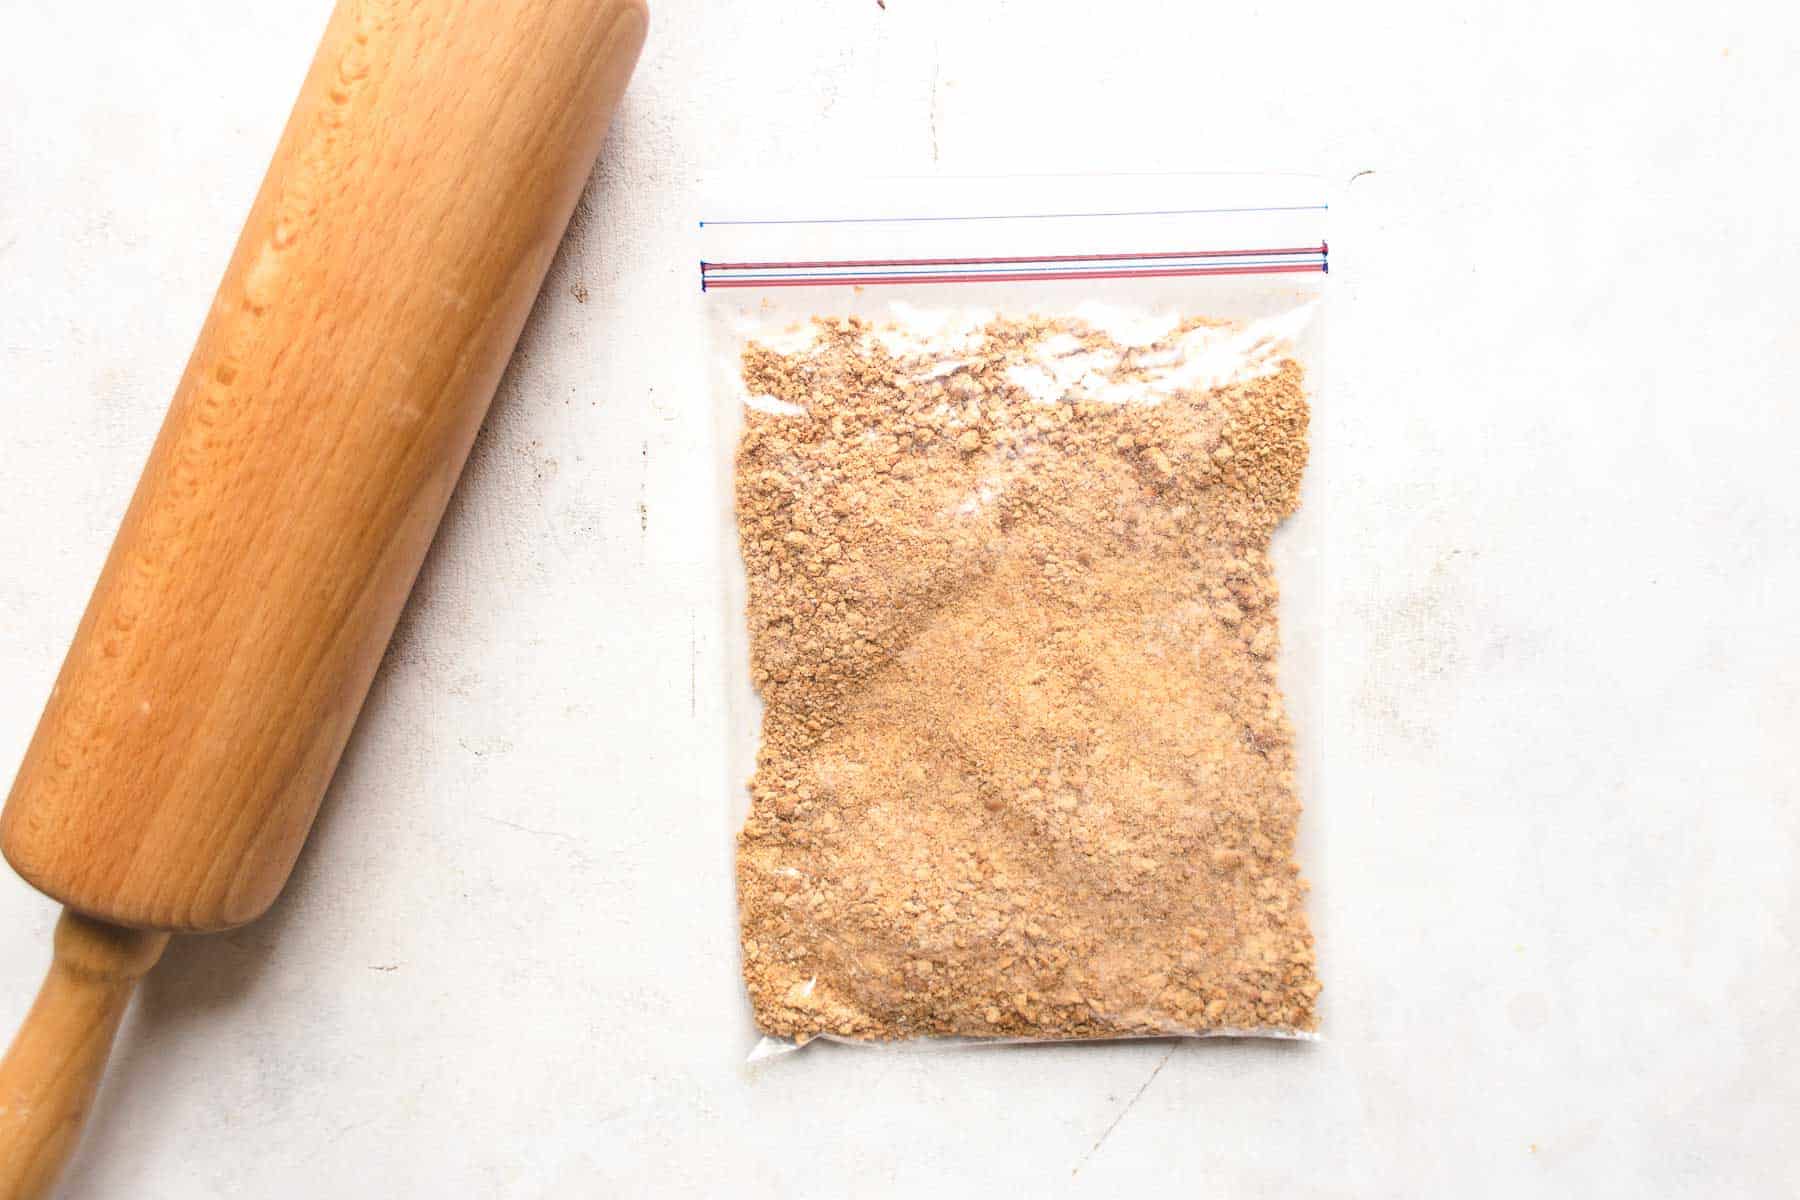 graham cracker crumbs in plastic bag with rolling pin next to it